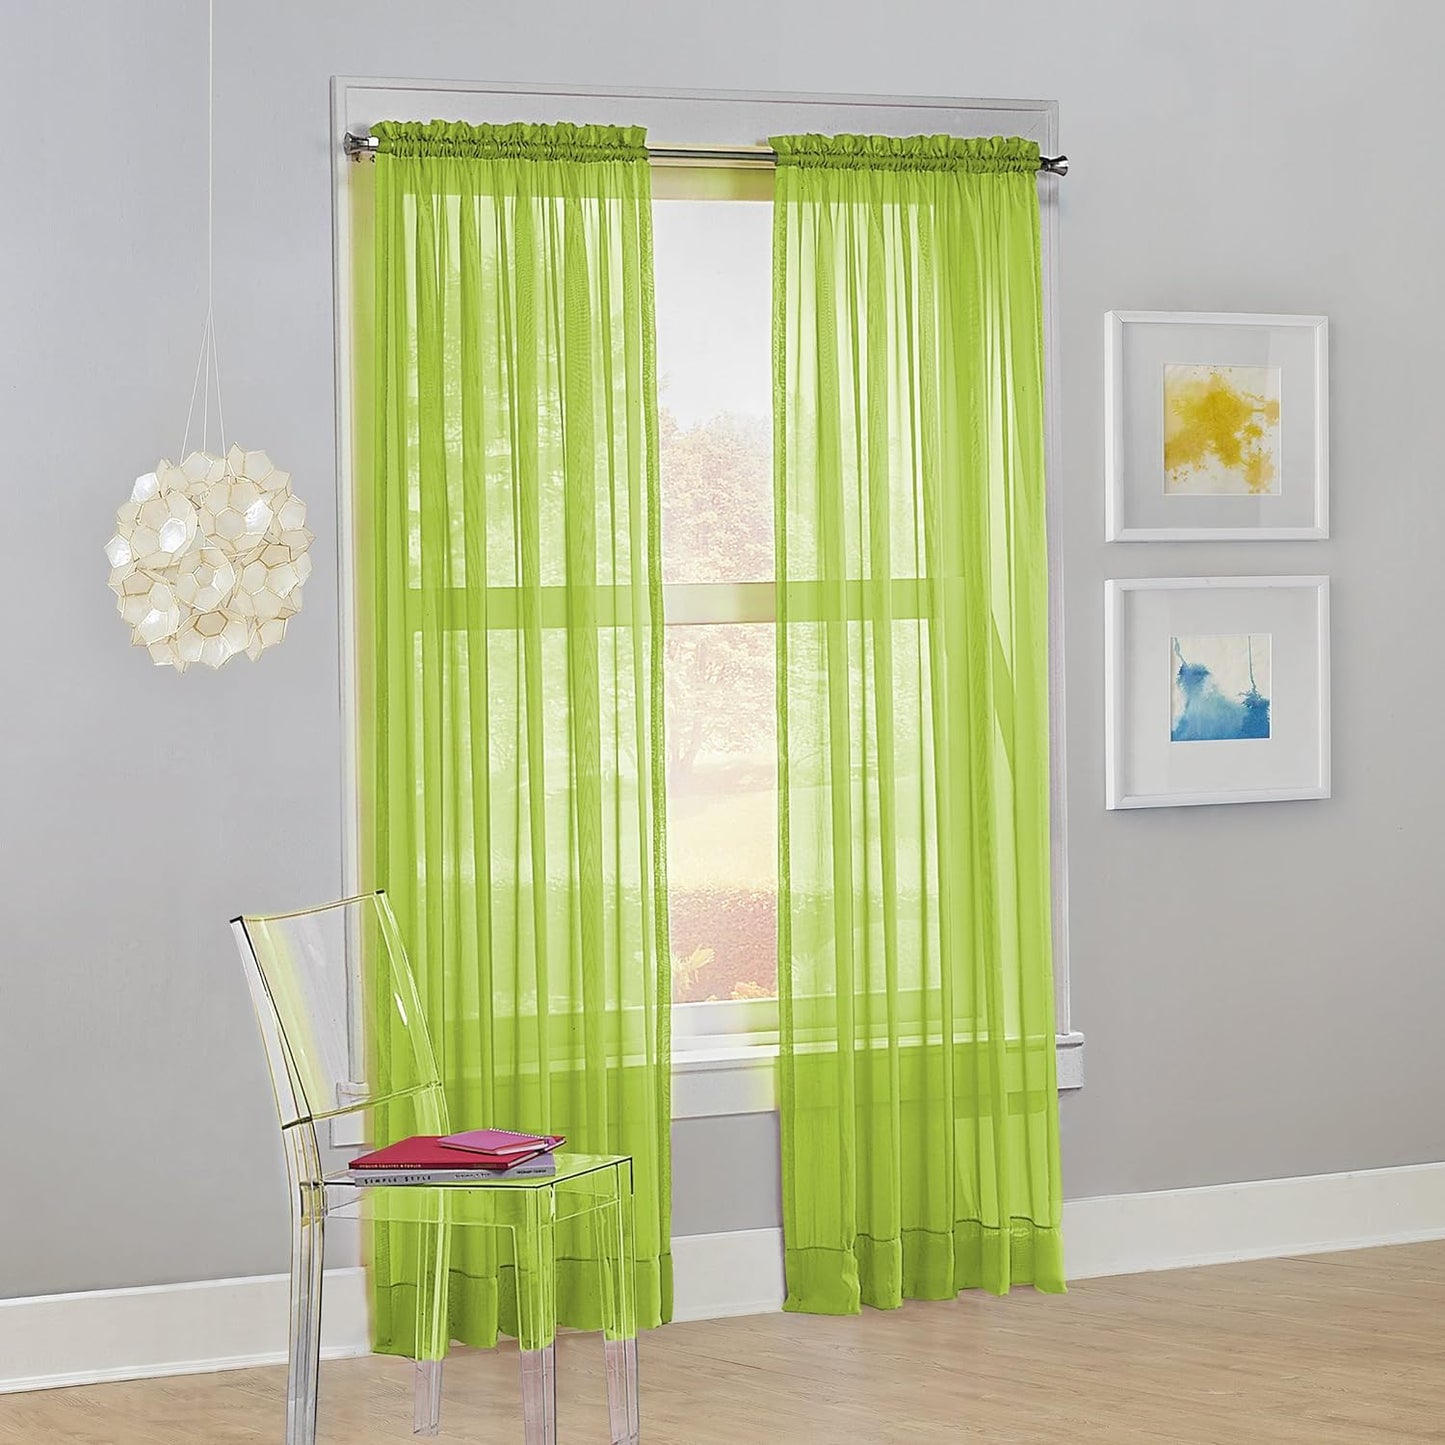 No. 918 Calypso Sheer Voile Rod Pocket Curtain Panel, 59" X 84", Pink  No. 918 Lime 59" X 84" Panel 